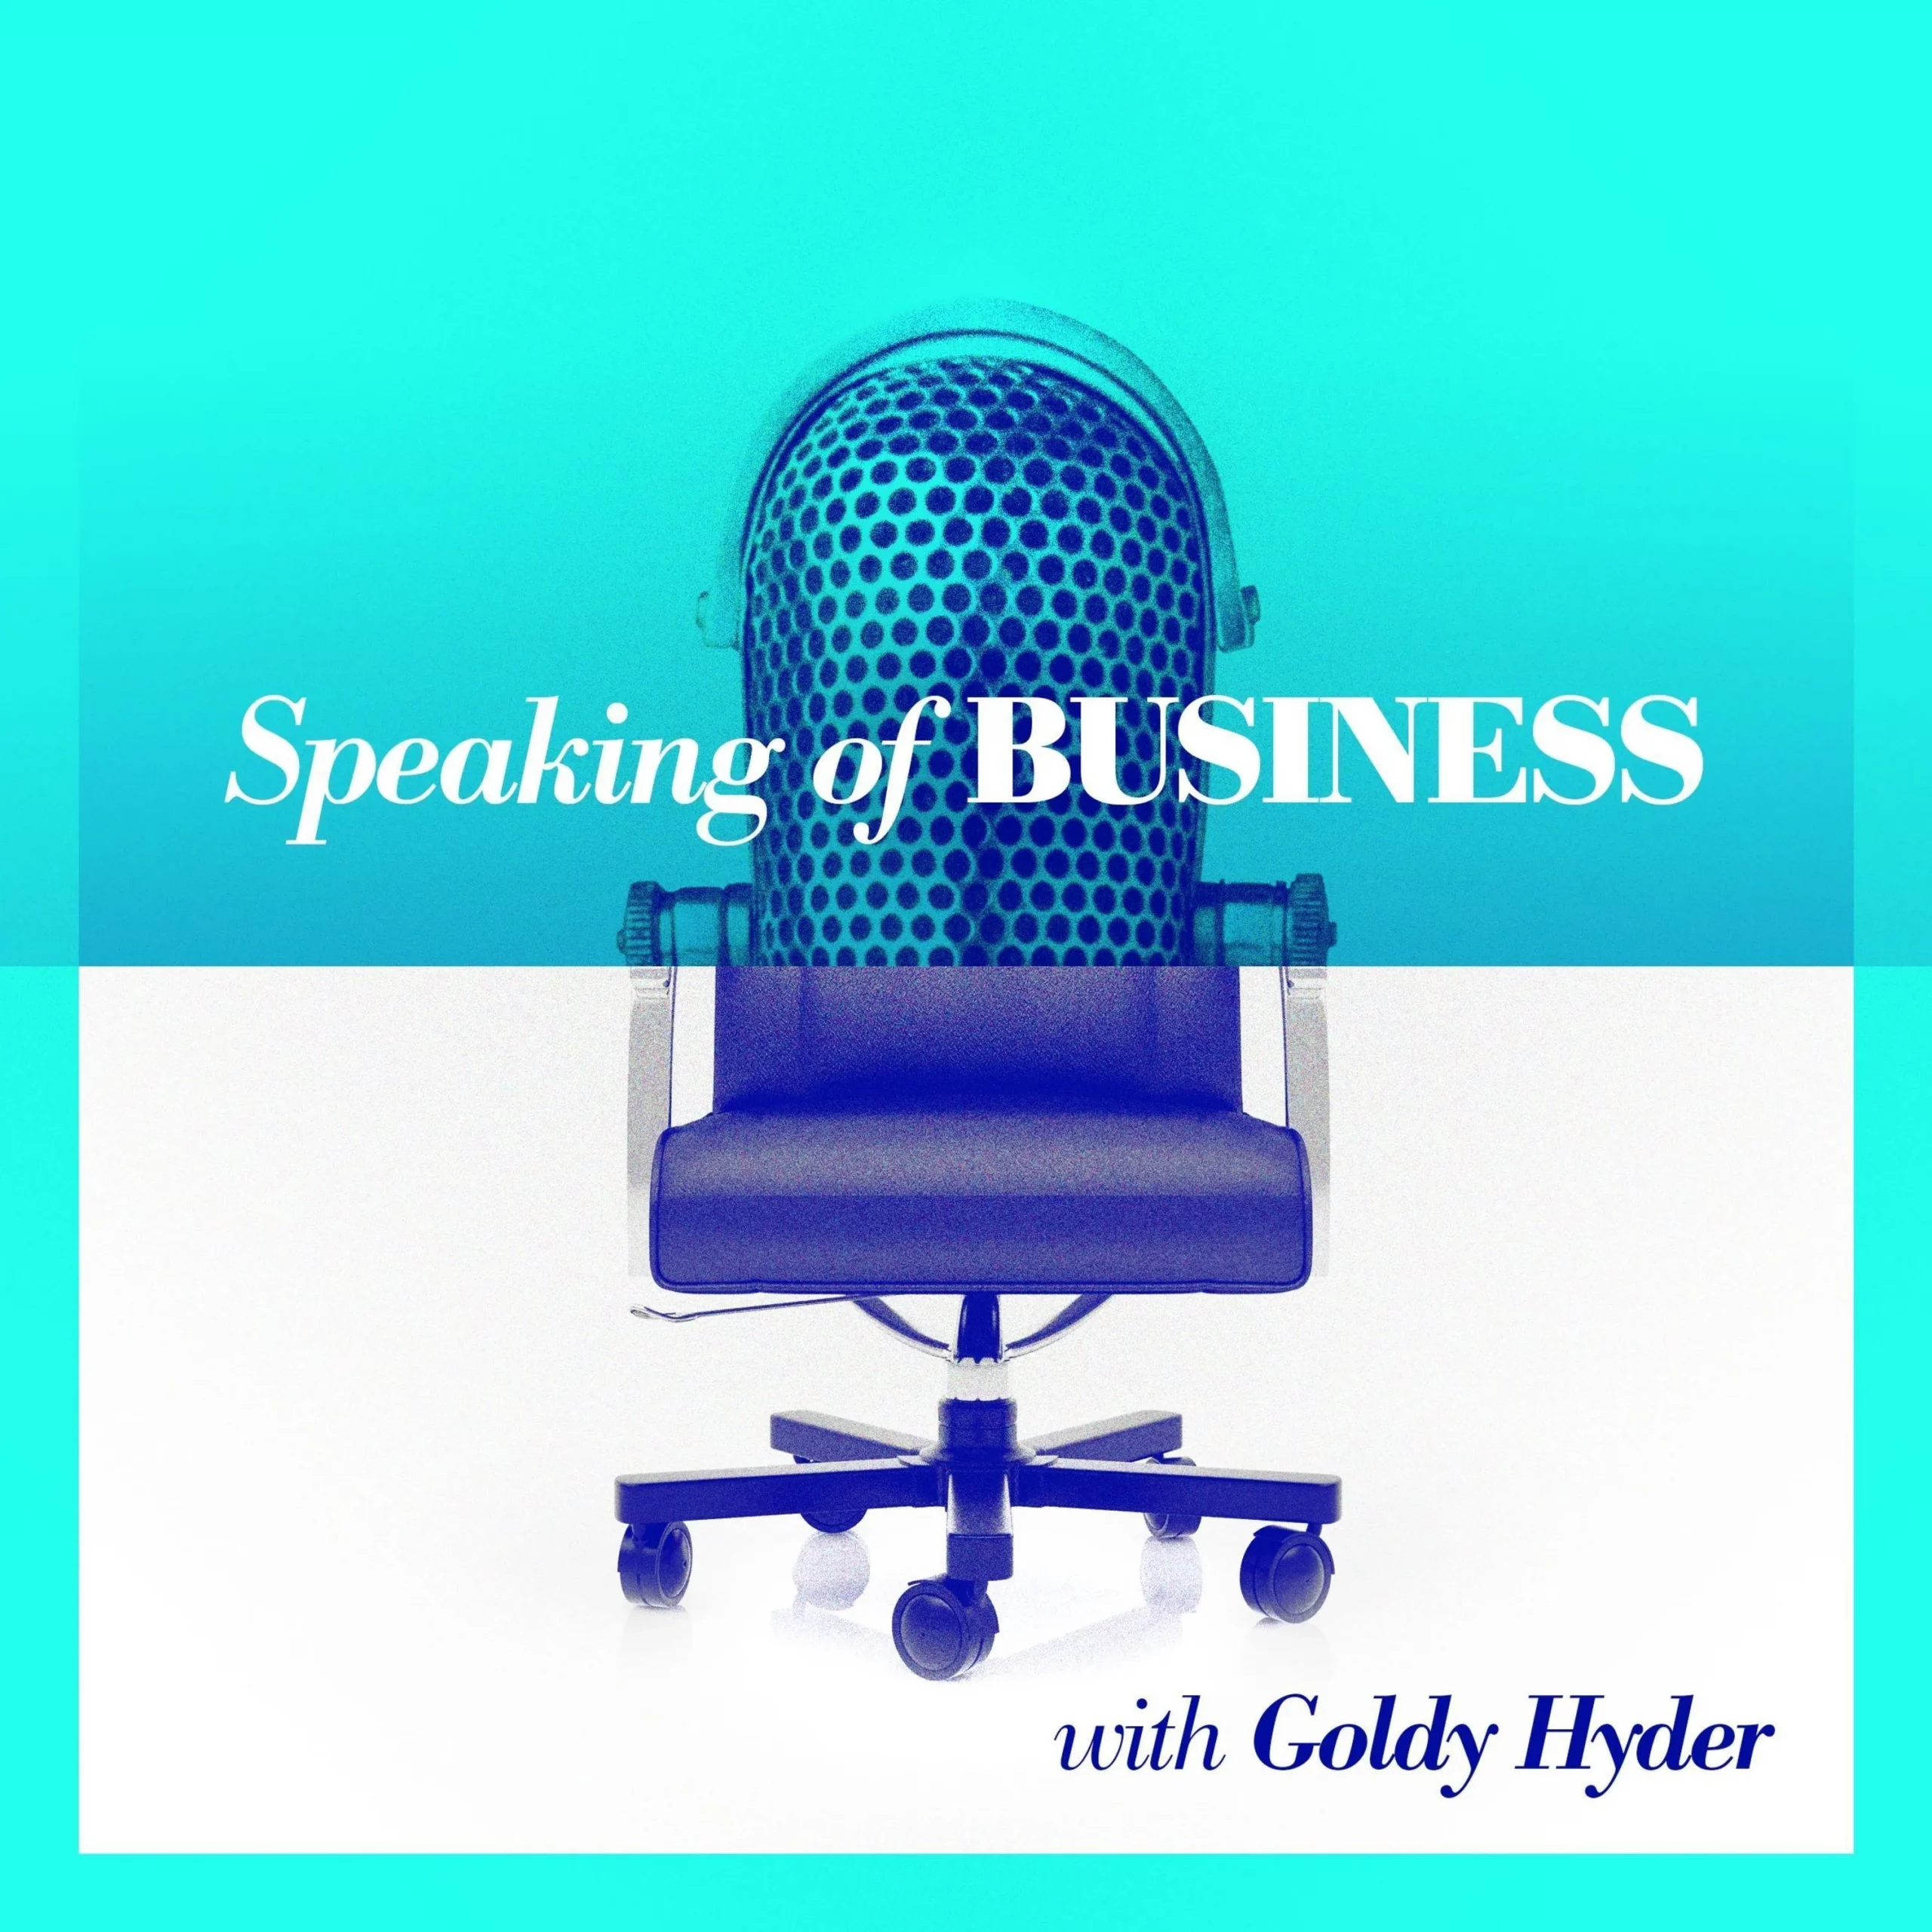 Speaking of Business with Goldy Hyder